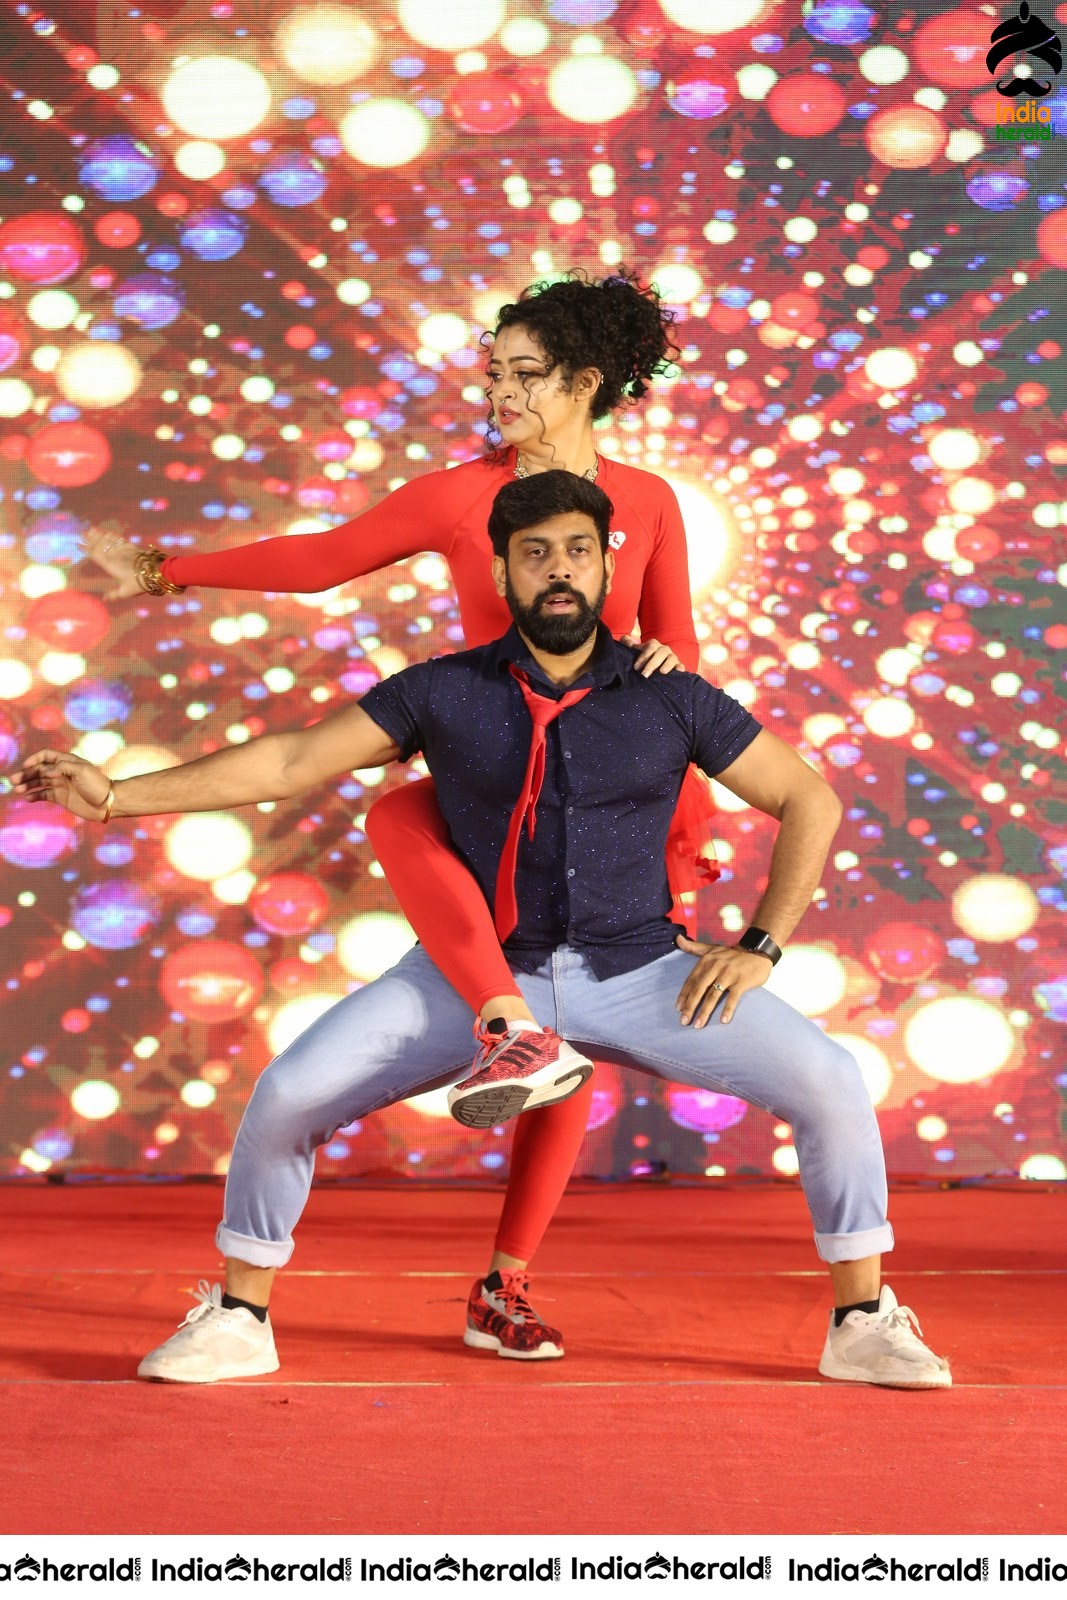 Hot Dance Performed On the Stage at Ullala Ullala Movie Event Set 2